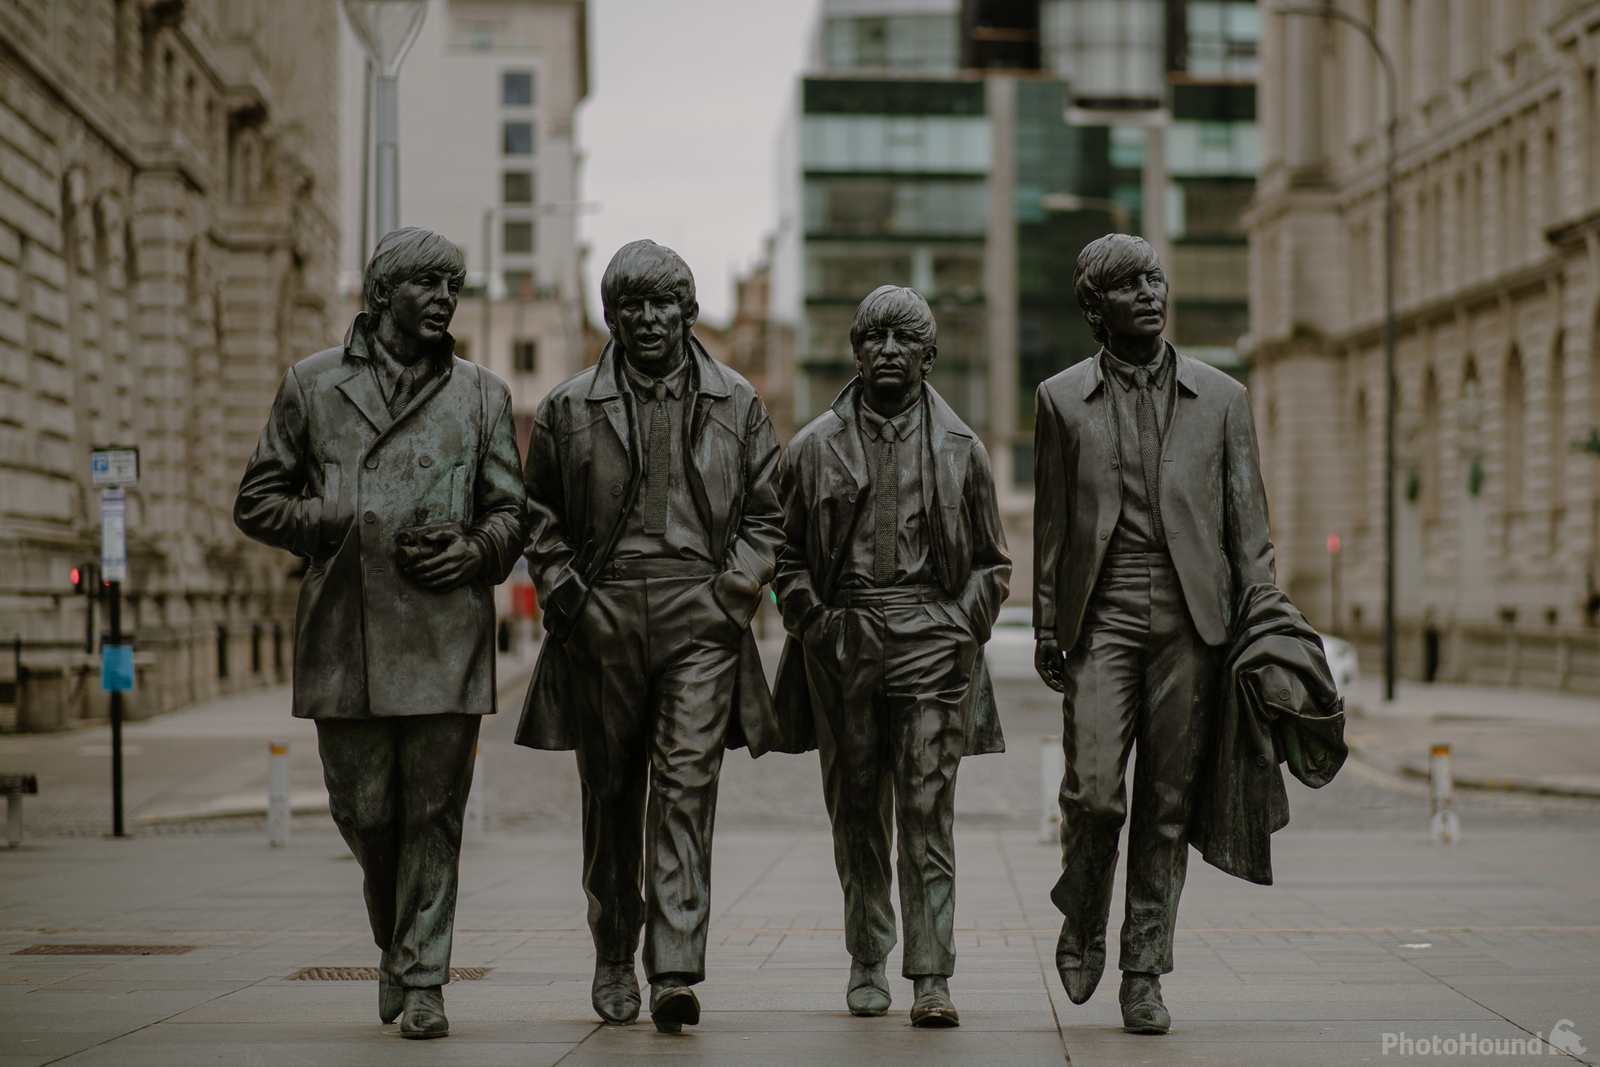 Image of The Beatles Statue by James Billings.